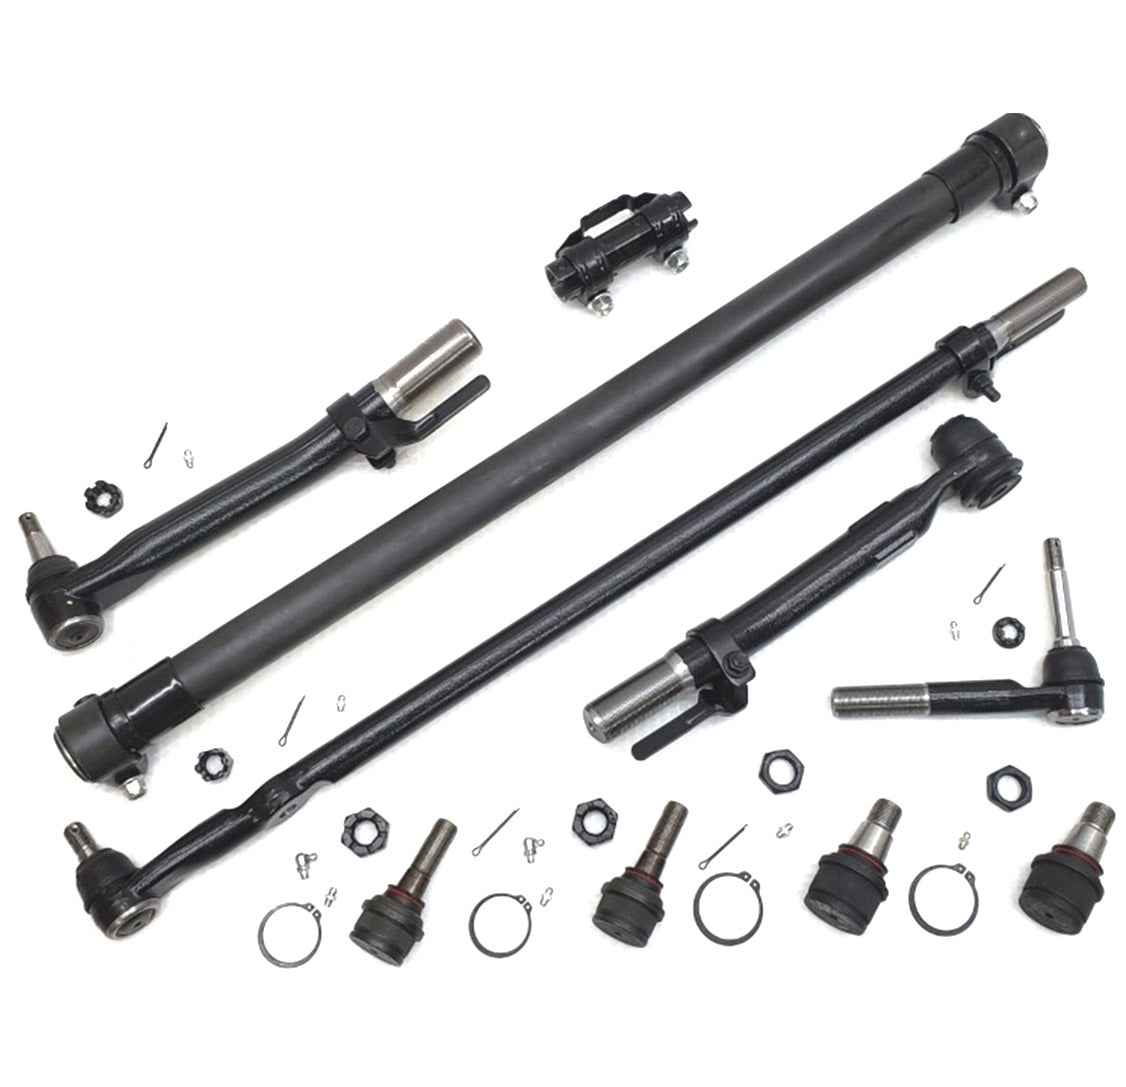 XRF Ball Joint Tie Rod Drag Link Sleeve Steering Kit for 2008-2010 Ford F250, F350 Super Duty 4x4